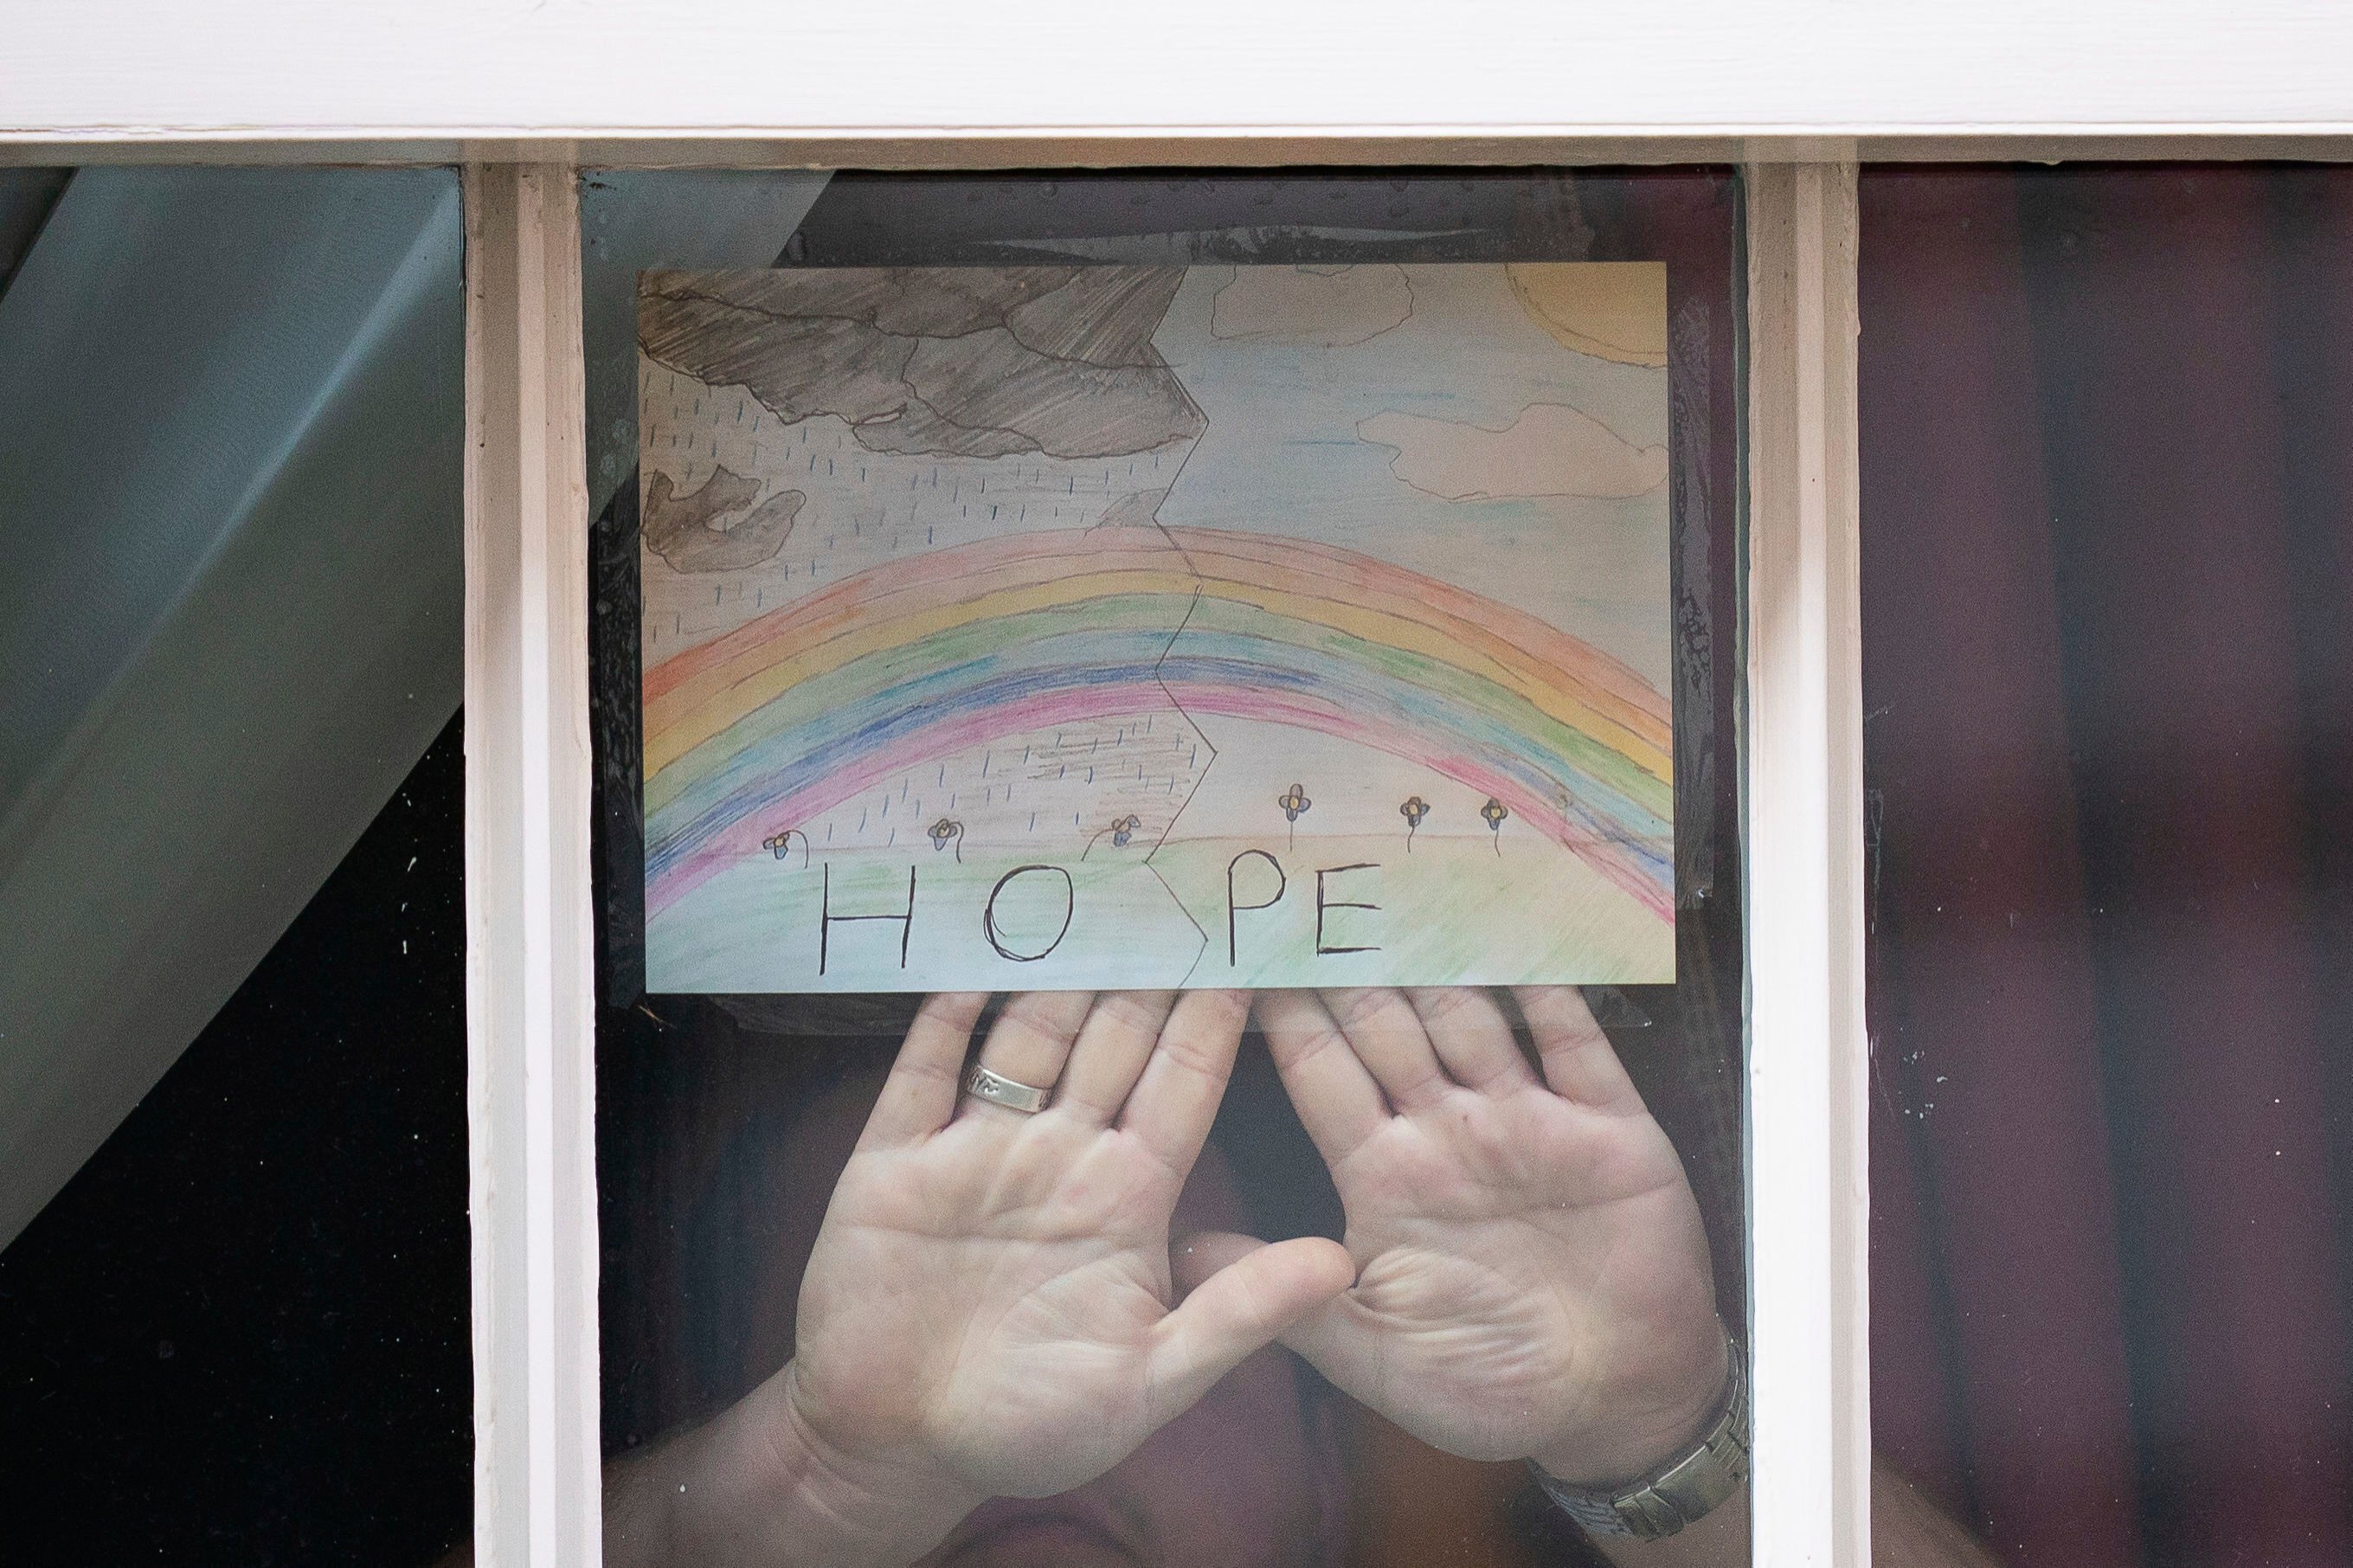 A drawing of a rainbow with the word "Hope" by 6-year-old Logan is displayed in one of the windows of 10 Downing Street, London, April 9, 2020. (AP Photo)